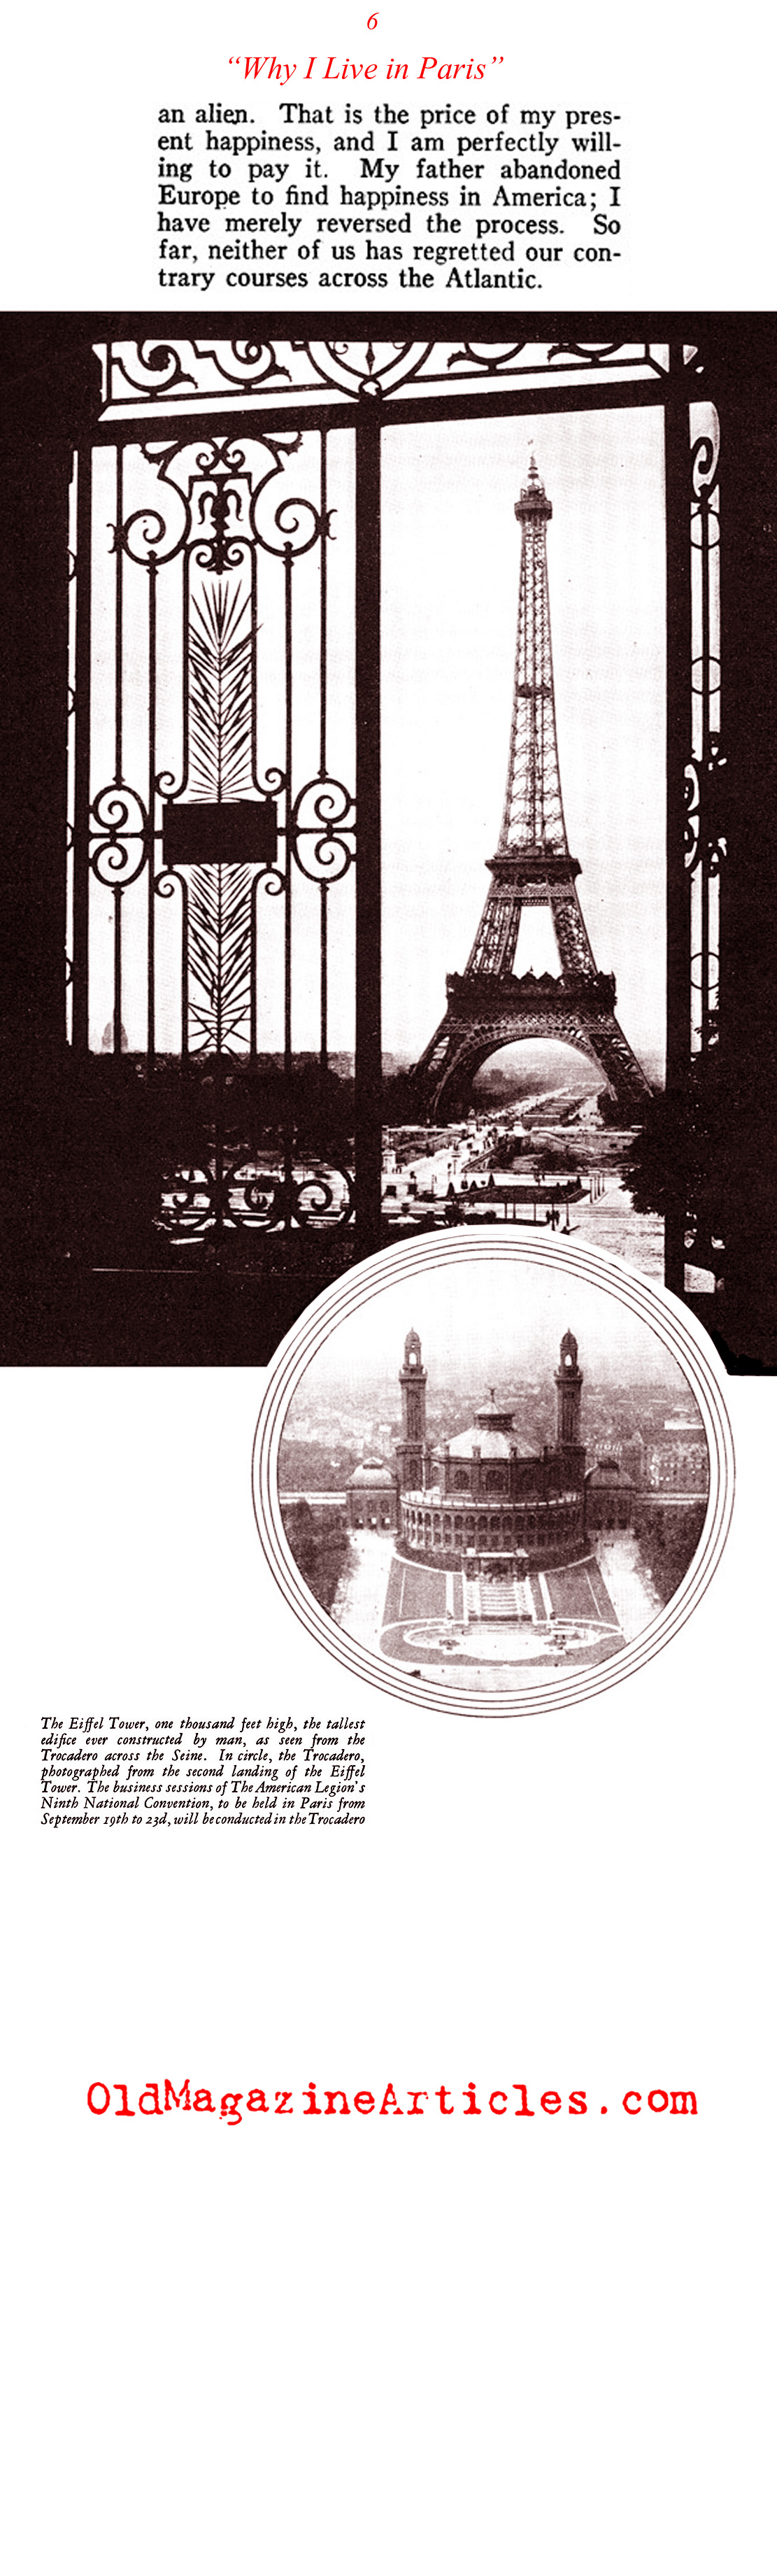 ''Why I Live in Paris'' by a Former American Soldier (American Legion Monthly, 1927)